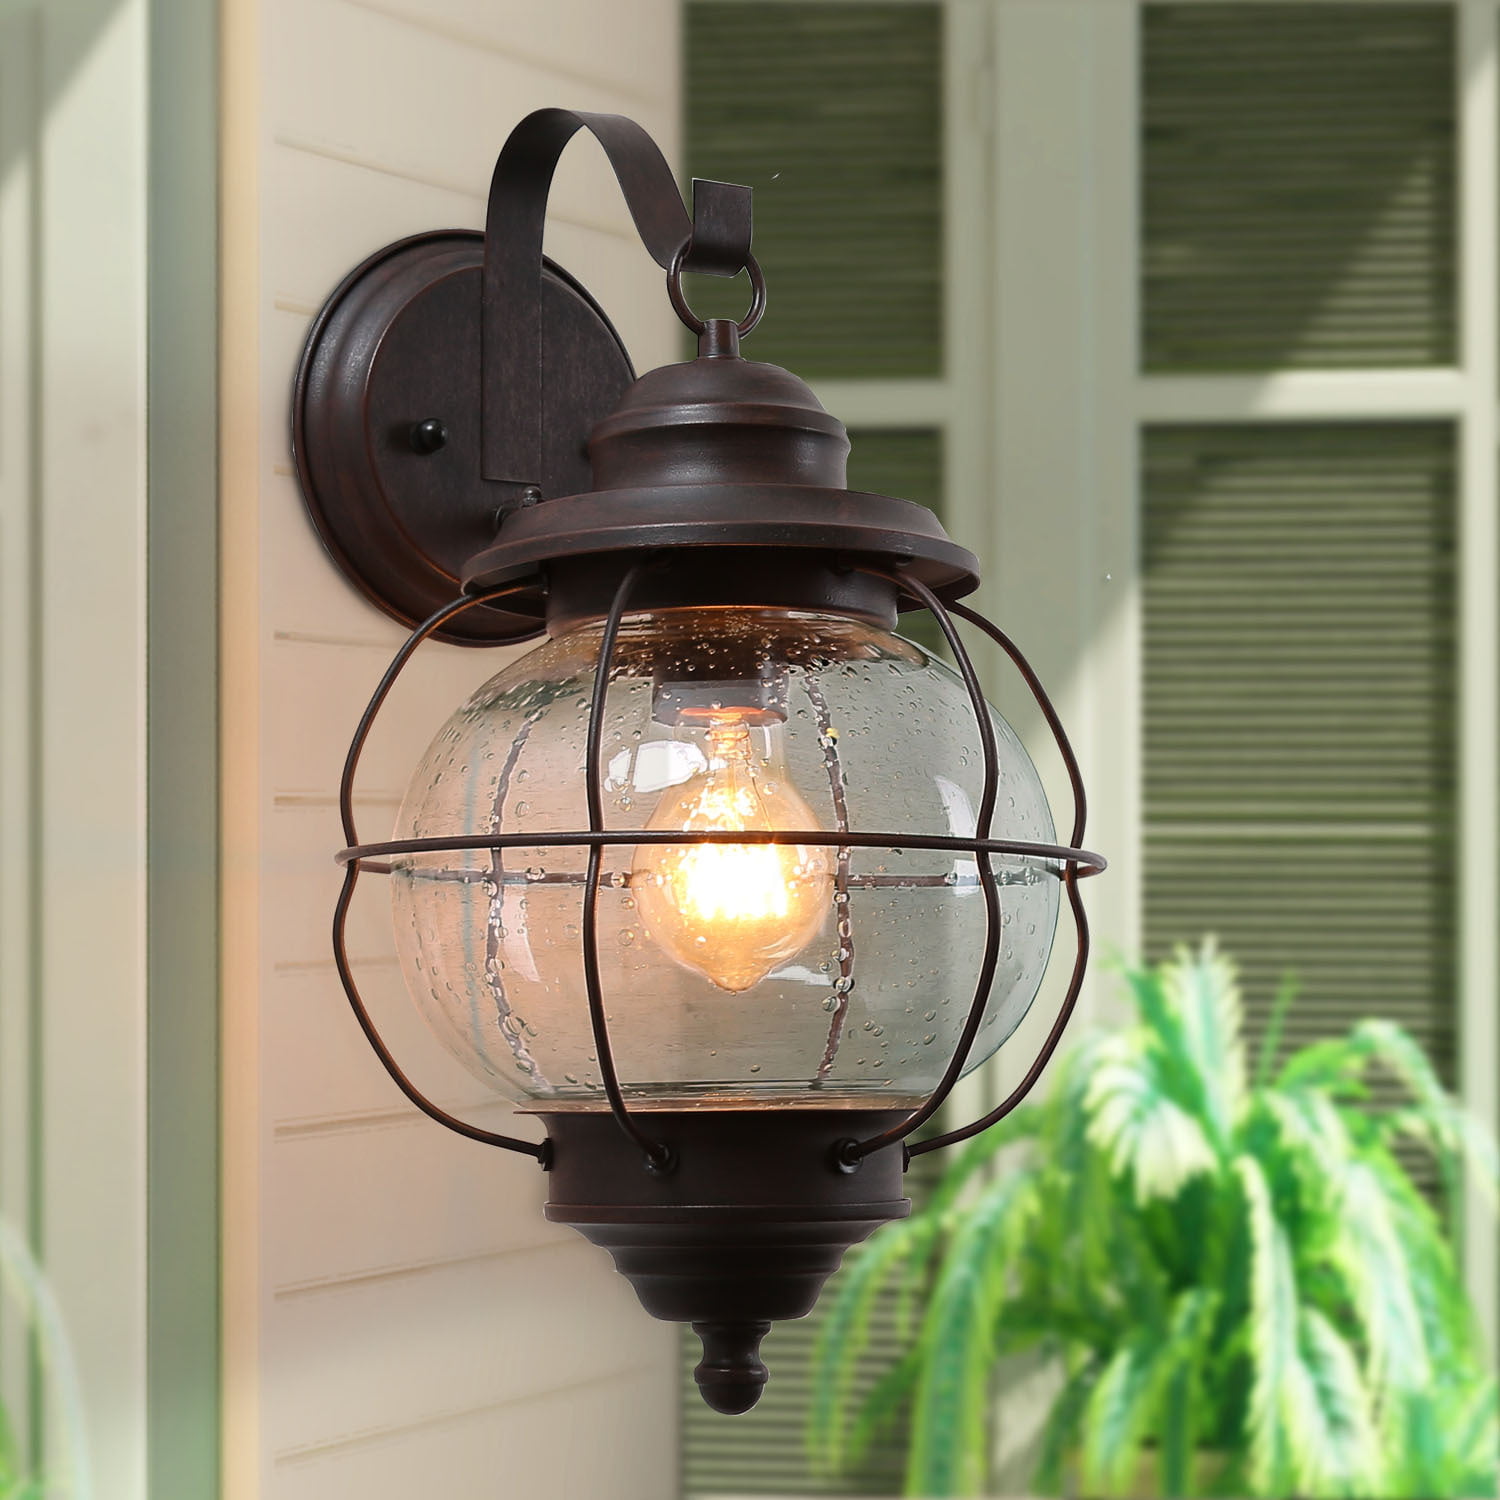 Large Traditional Style Black Outdoor Security IP44 Rated Upward Facing Wall Lantern Light with Beveled Glass Panels LED Compatible